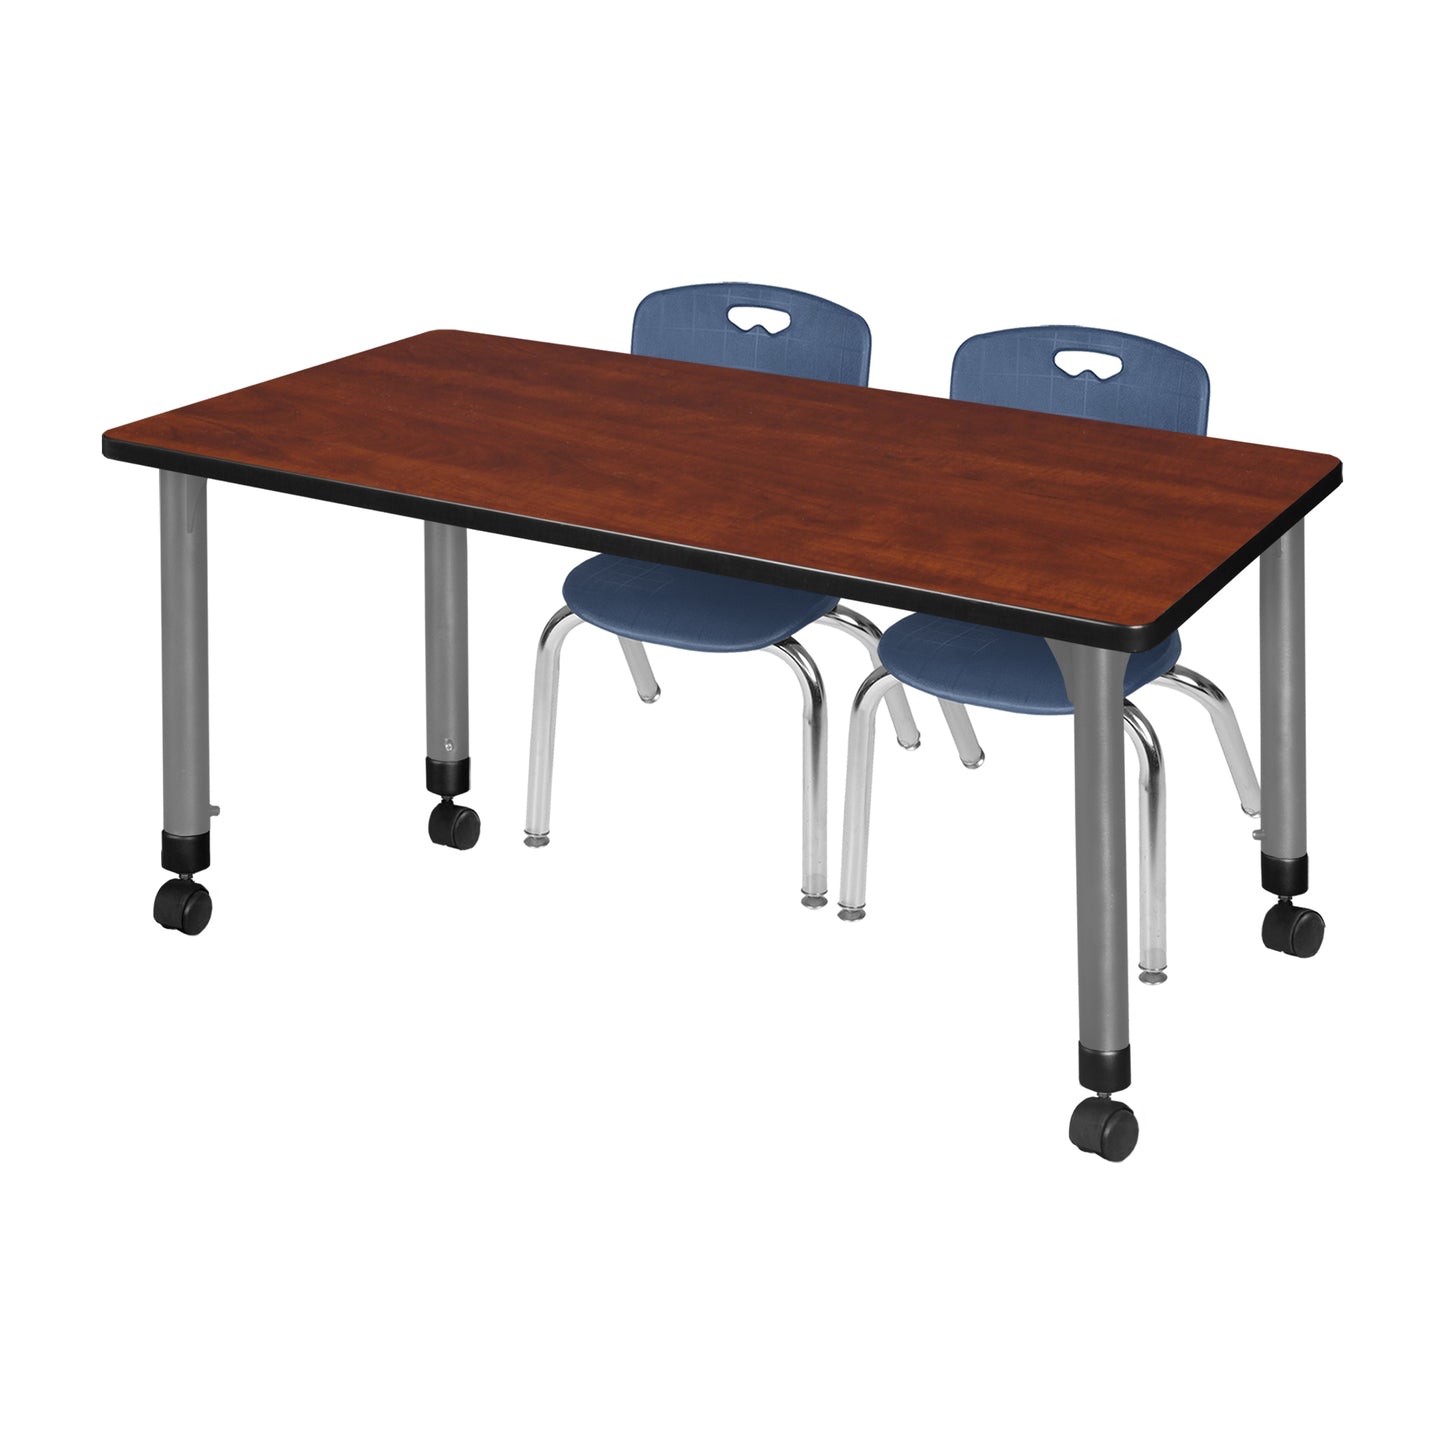 Regency Kee 60 x 30 in. Adjustable Classroom Table & 2 Andy 12 in. Stack Chairs